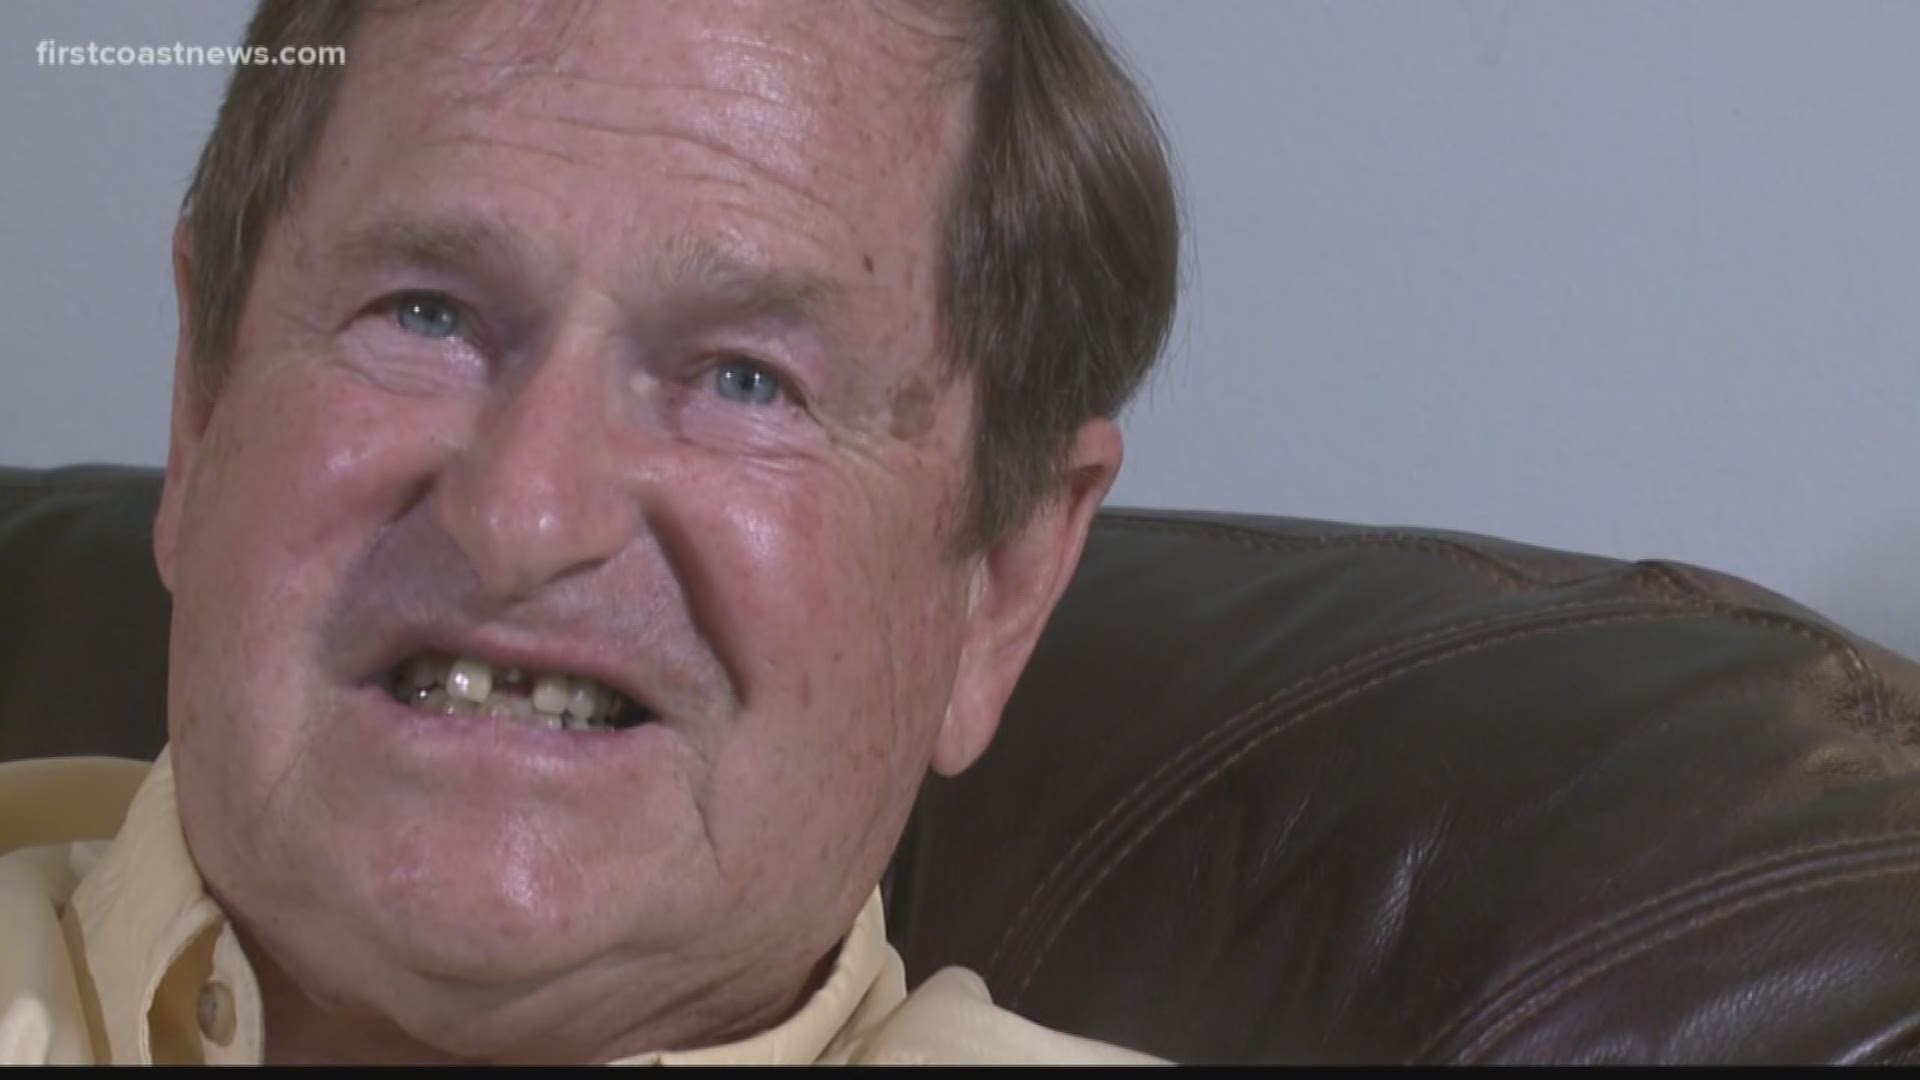 A disabled Navy veteran says for the last six months, he's had a hole in his mouth that needs to be filled, but he's still waiting on the paperwork from the Veteran Affairs.